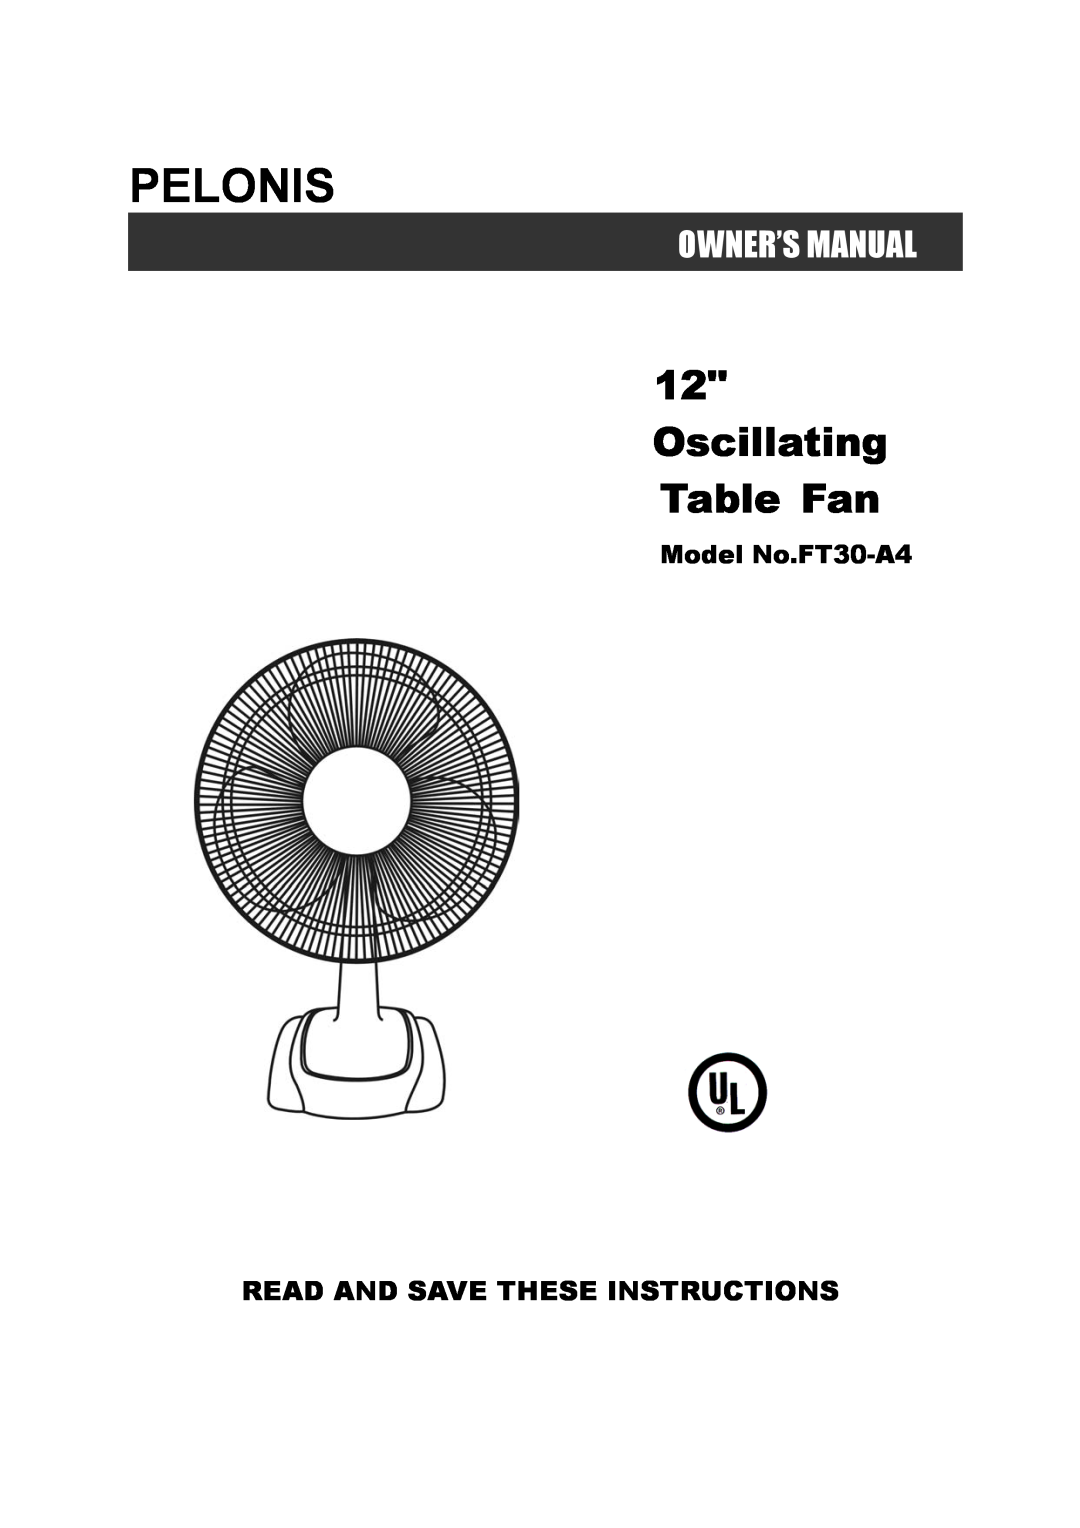 Pelonis owner manual Model No.FT30-A4, Pelonis, Oscillating Table Fan, Read And Save These Instructions 